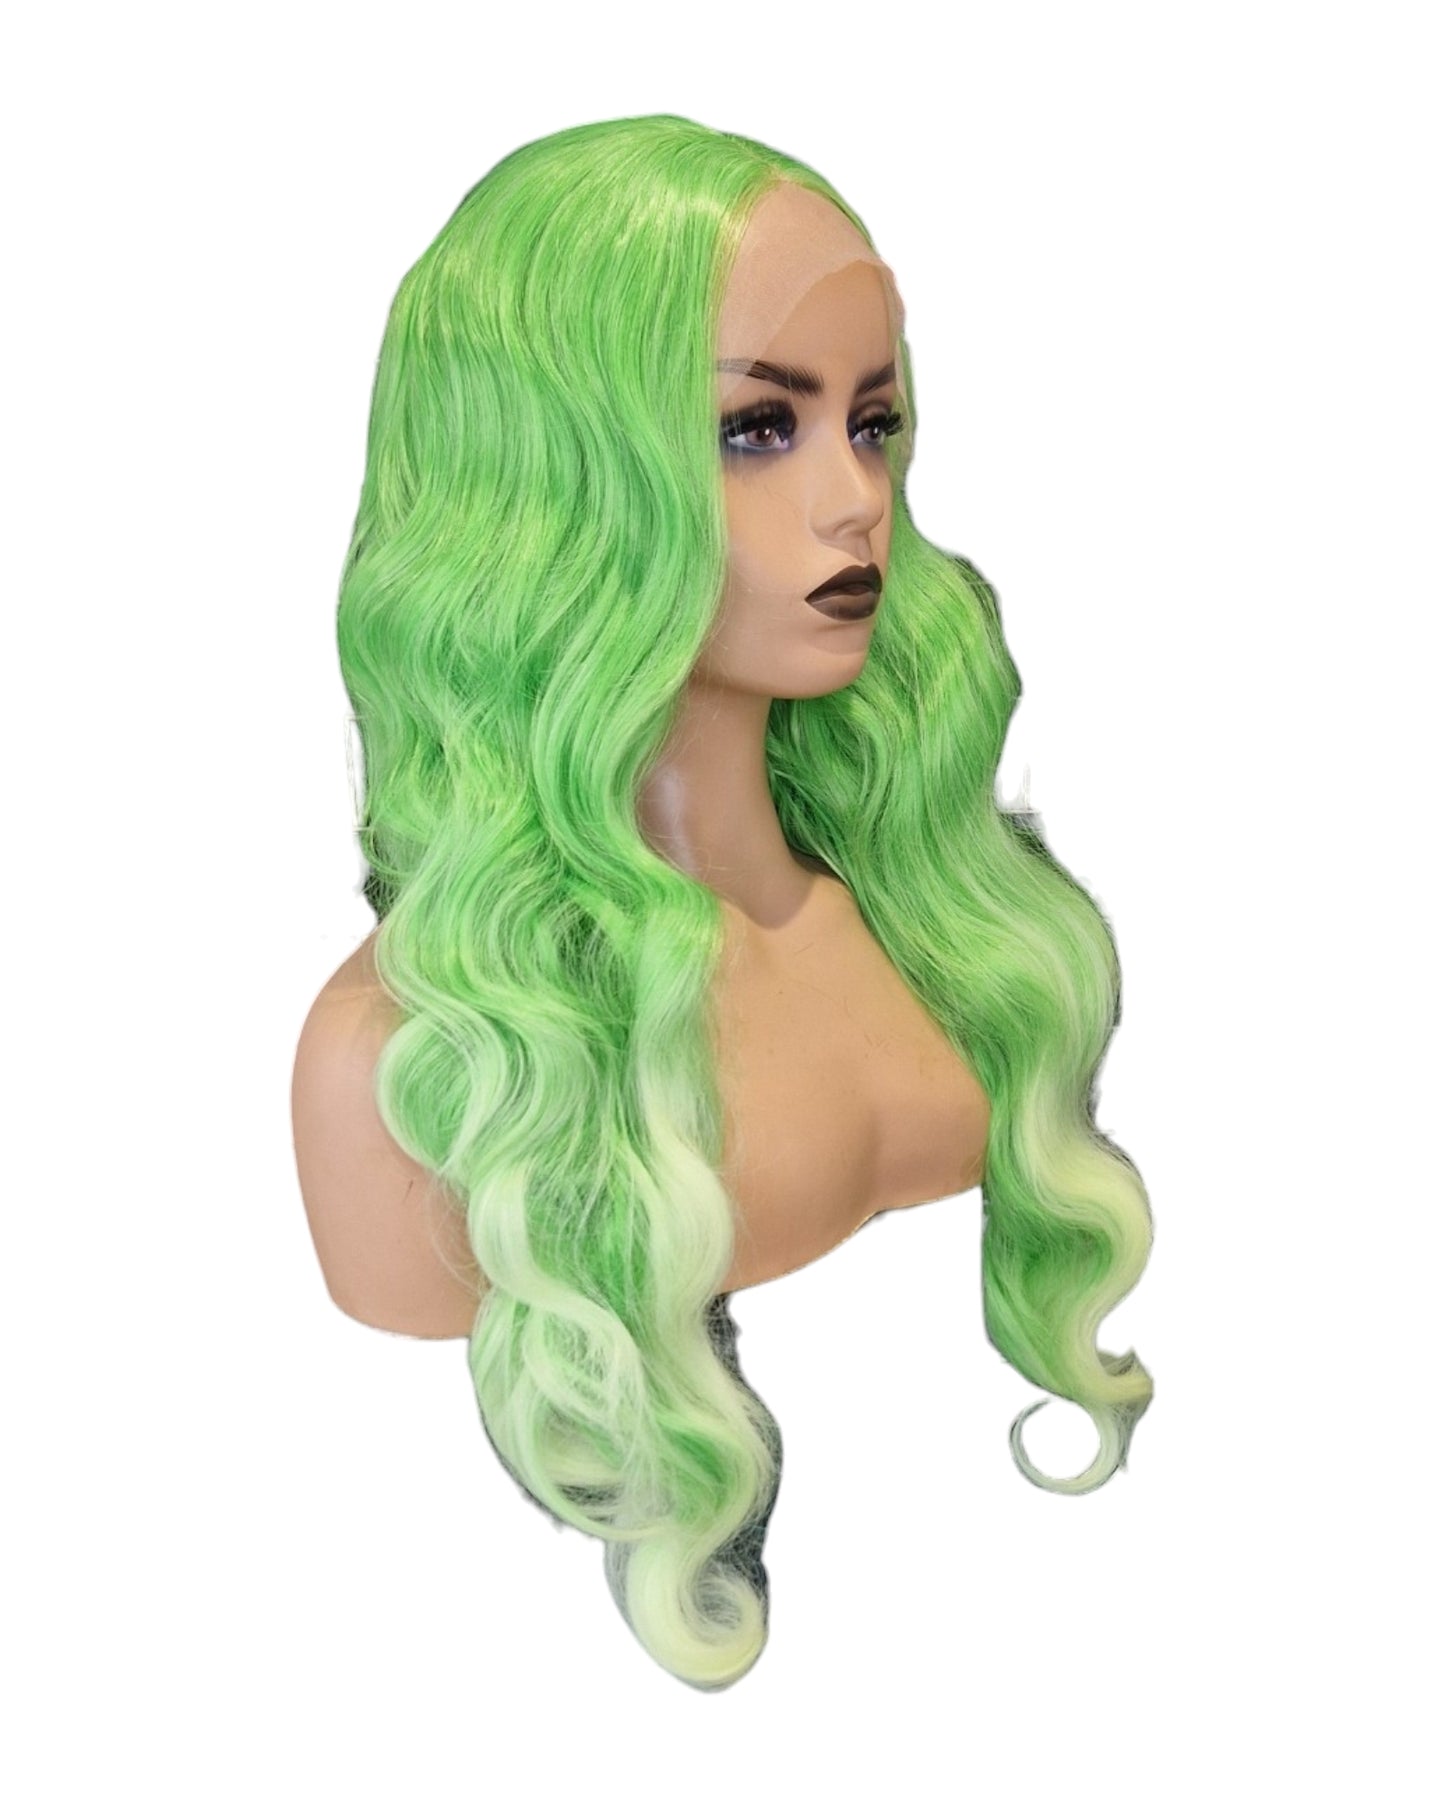 Green Ombre Wavy Lace Front Wig. Viper